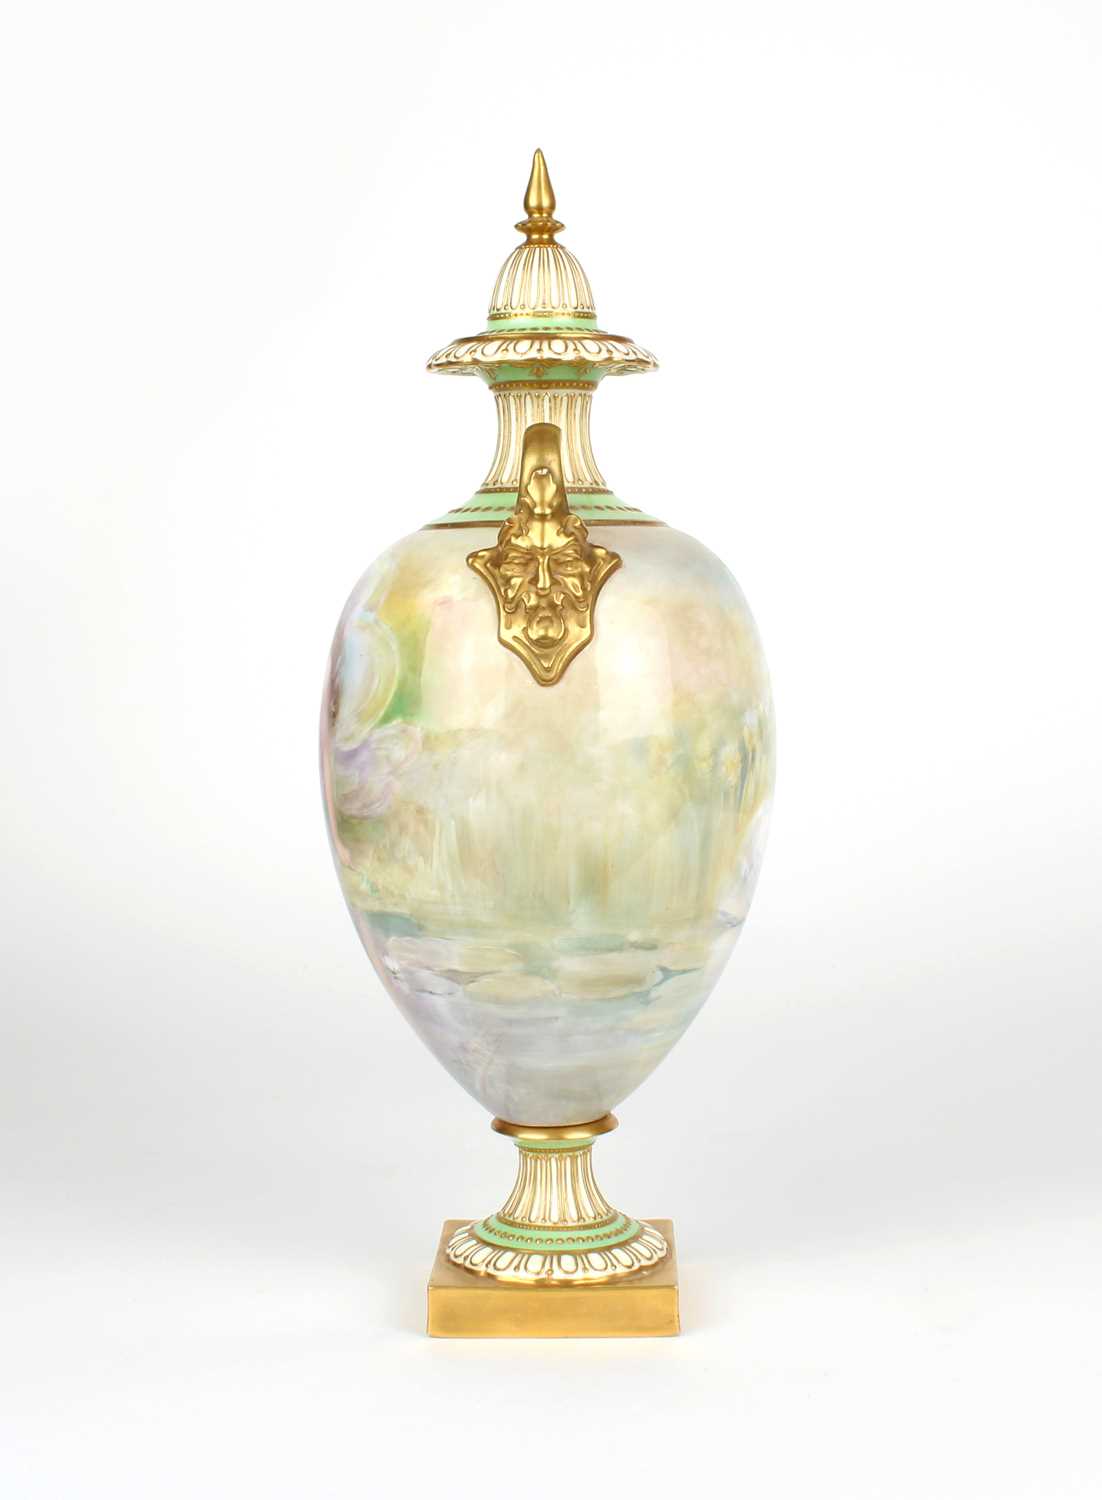 George White for Royal Doulton "Leda and the Swan" Urn - Image 3 of 20